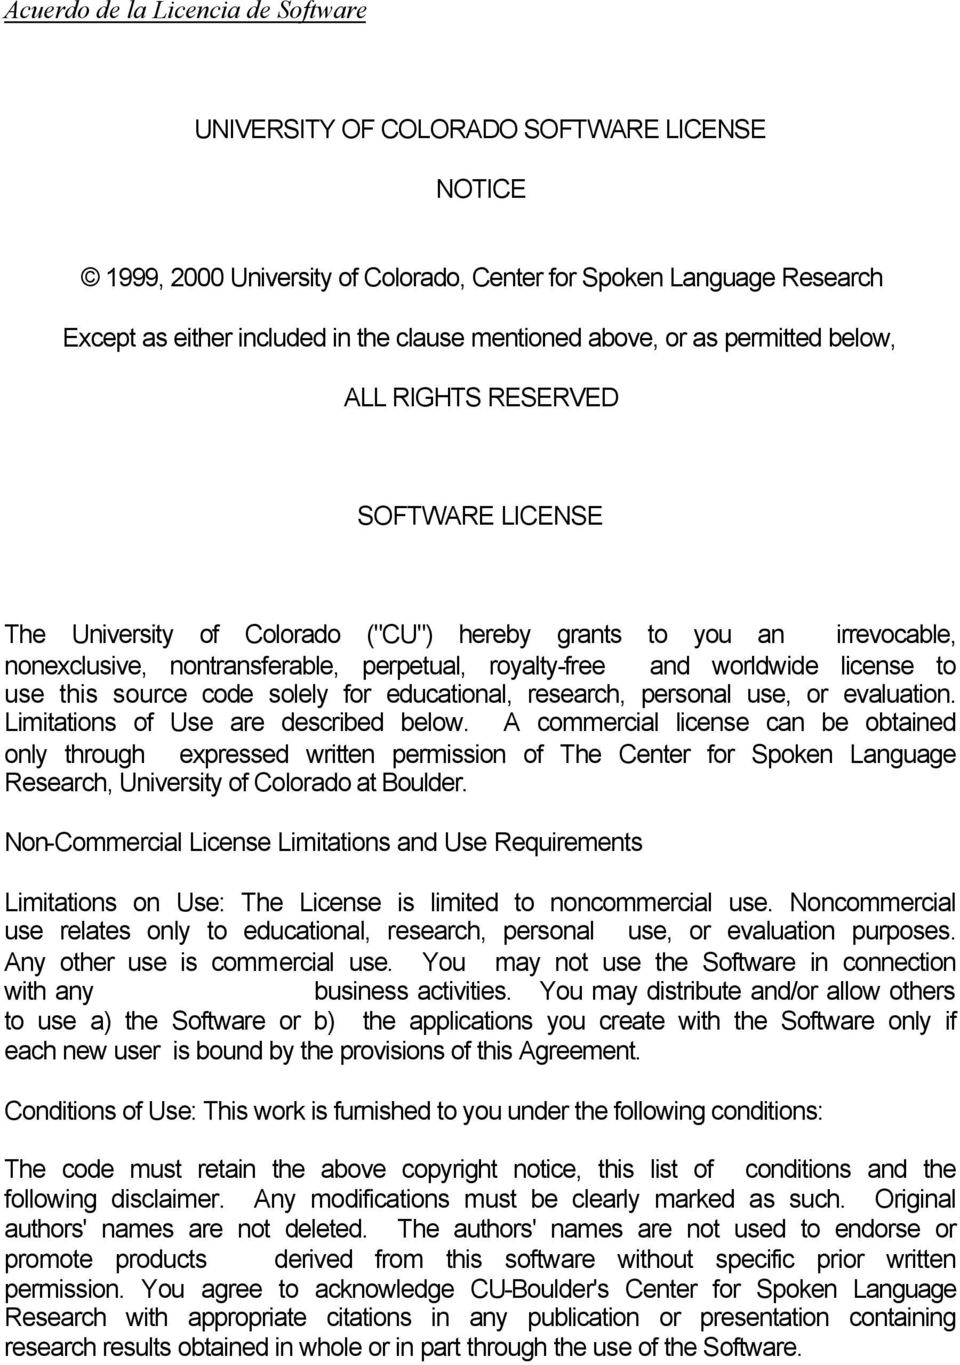 royalty-free and worldwide license to use this source code solely for educational, research, personal use, or evaluation. Limitations of Use are described below.